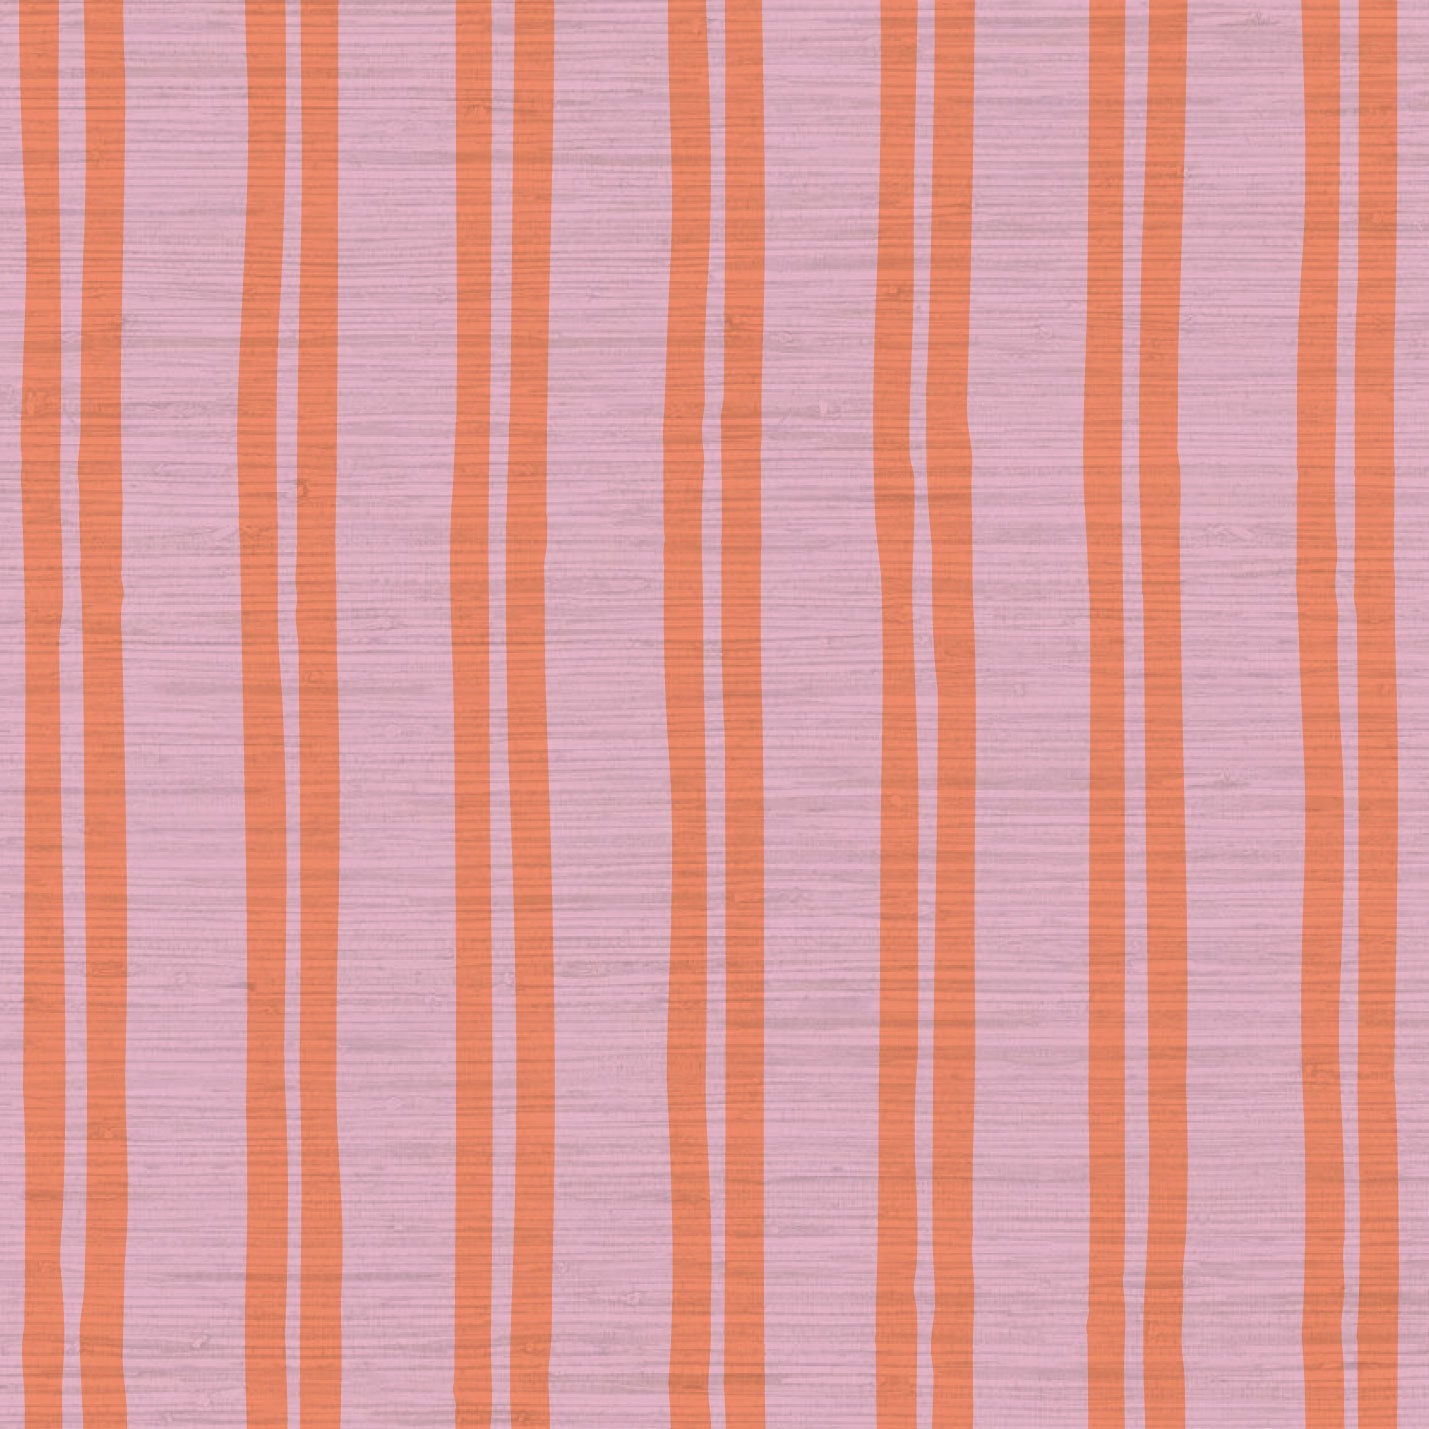 Grasscloth wallpaper Natural Textured Eco-Friendly Non-toxic High-quality Sustainable Interior Design Bold Custom Tailor-made Retro chic Grand millennial Maximalism Traditional Dopamine decor Tropical Jungle Coastal Garden Seaside Seashore Waterfront Retreat Relaxed beach vibes Beach cottage Shoreline Oceanfront Nautical Cabana preppy kids girl pink bubblegum coral red